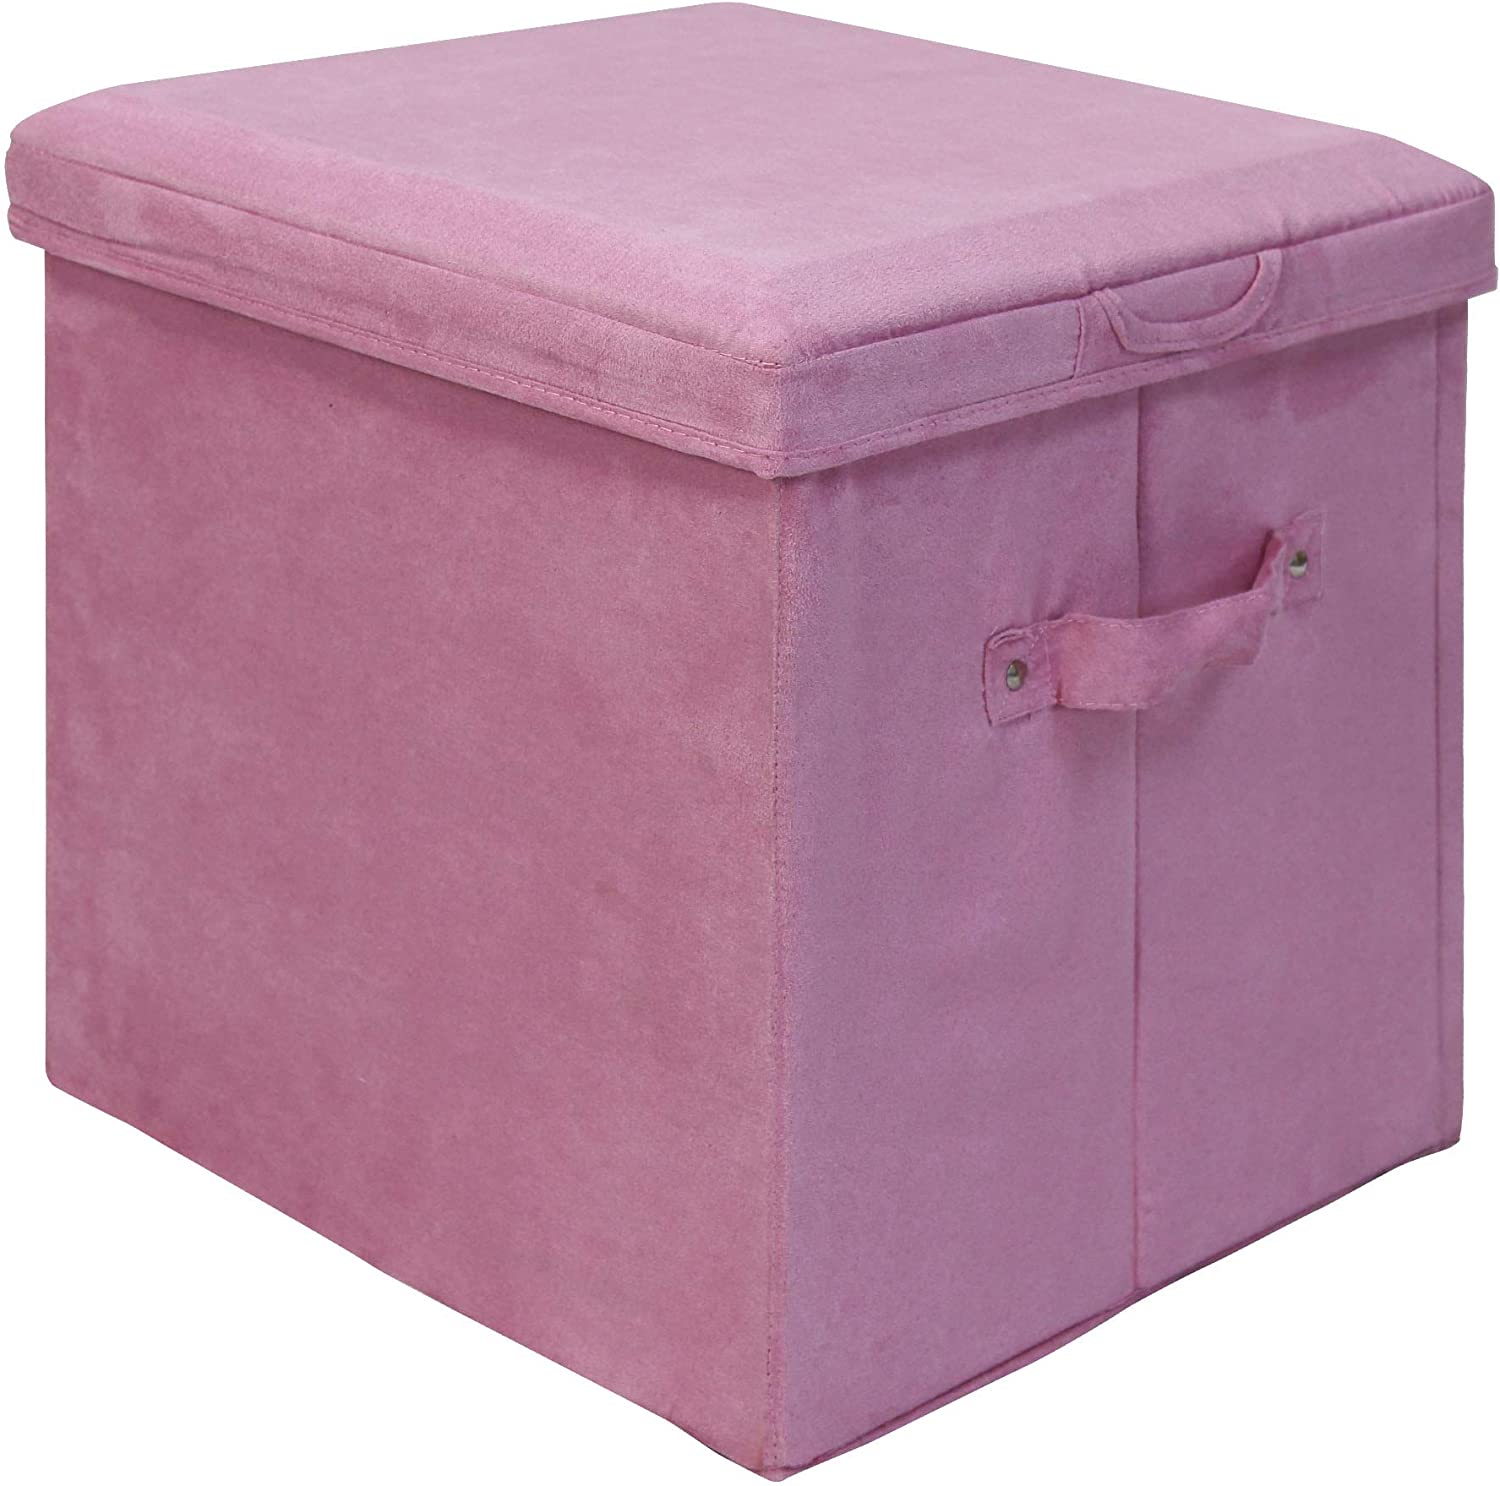 Casual Home Seat Pad Folding Storage Ottoman. Micro Suede Cover, Pink